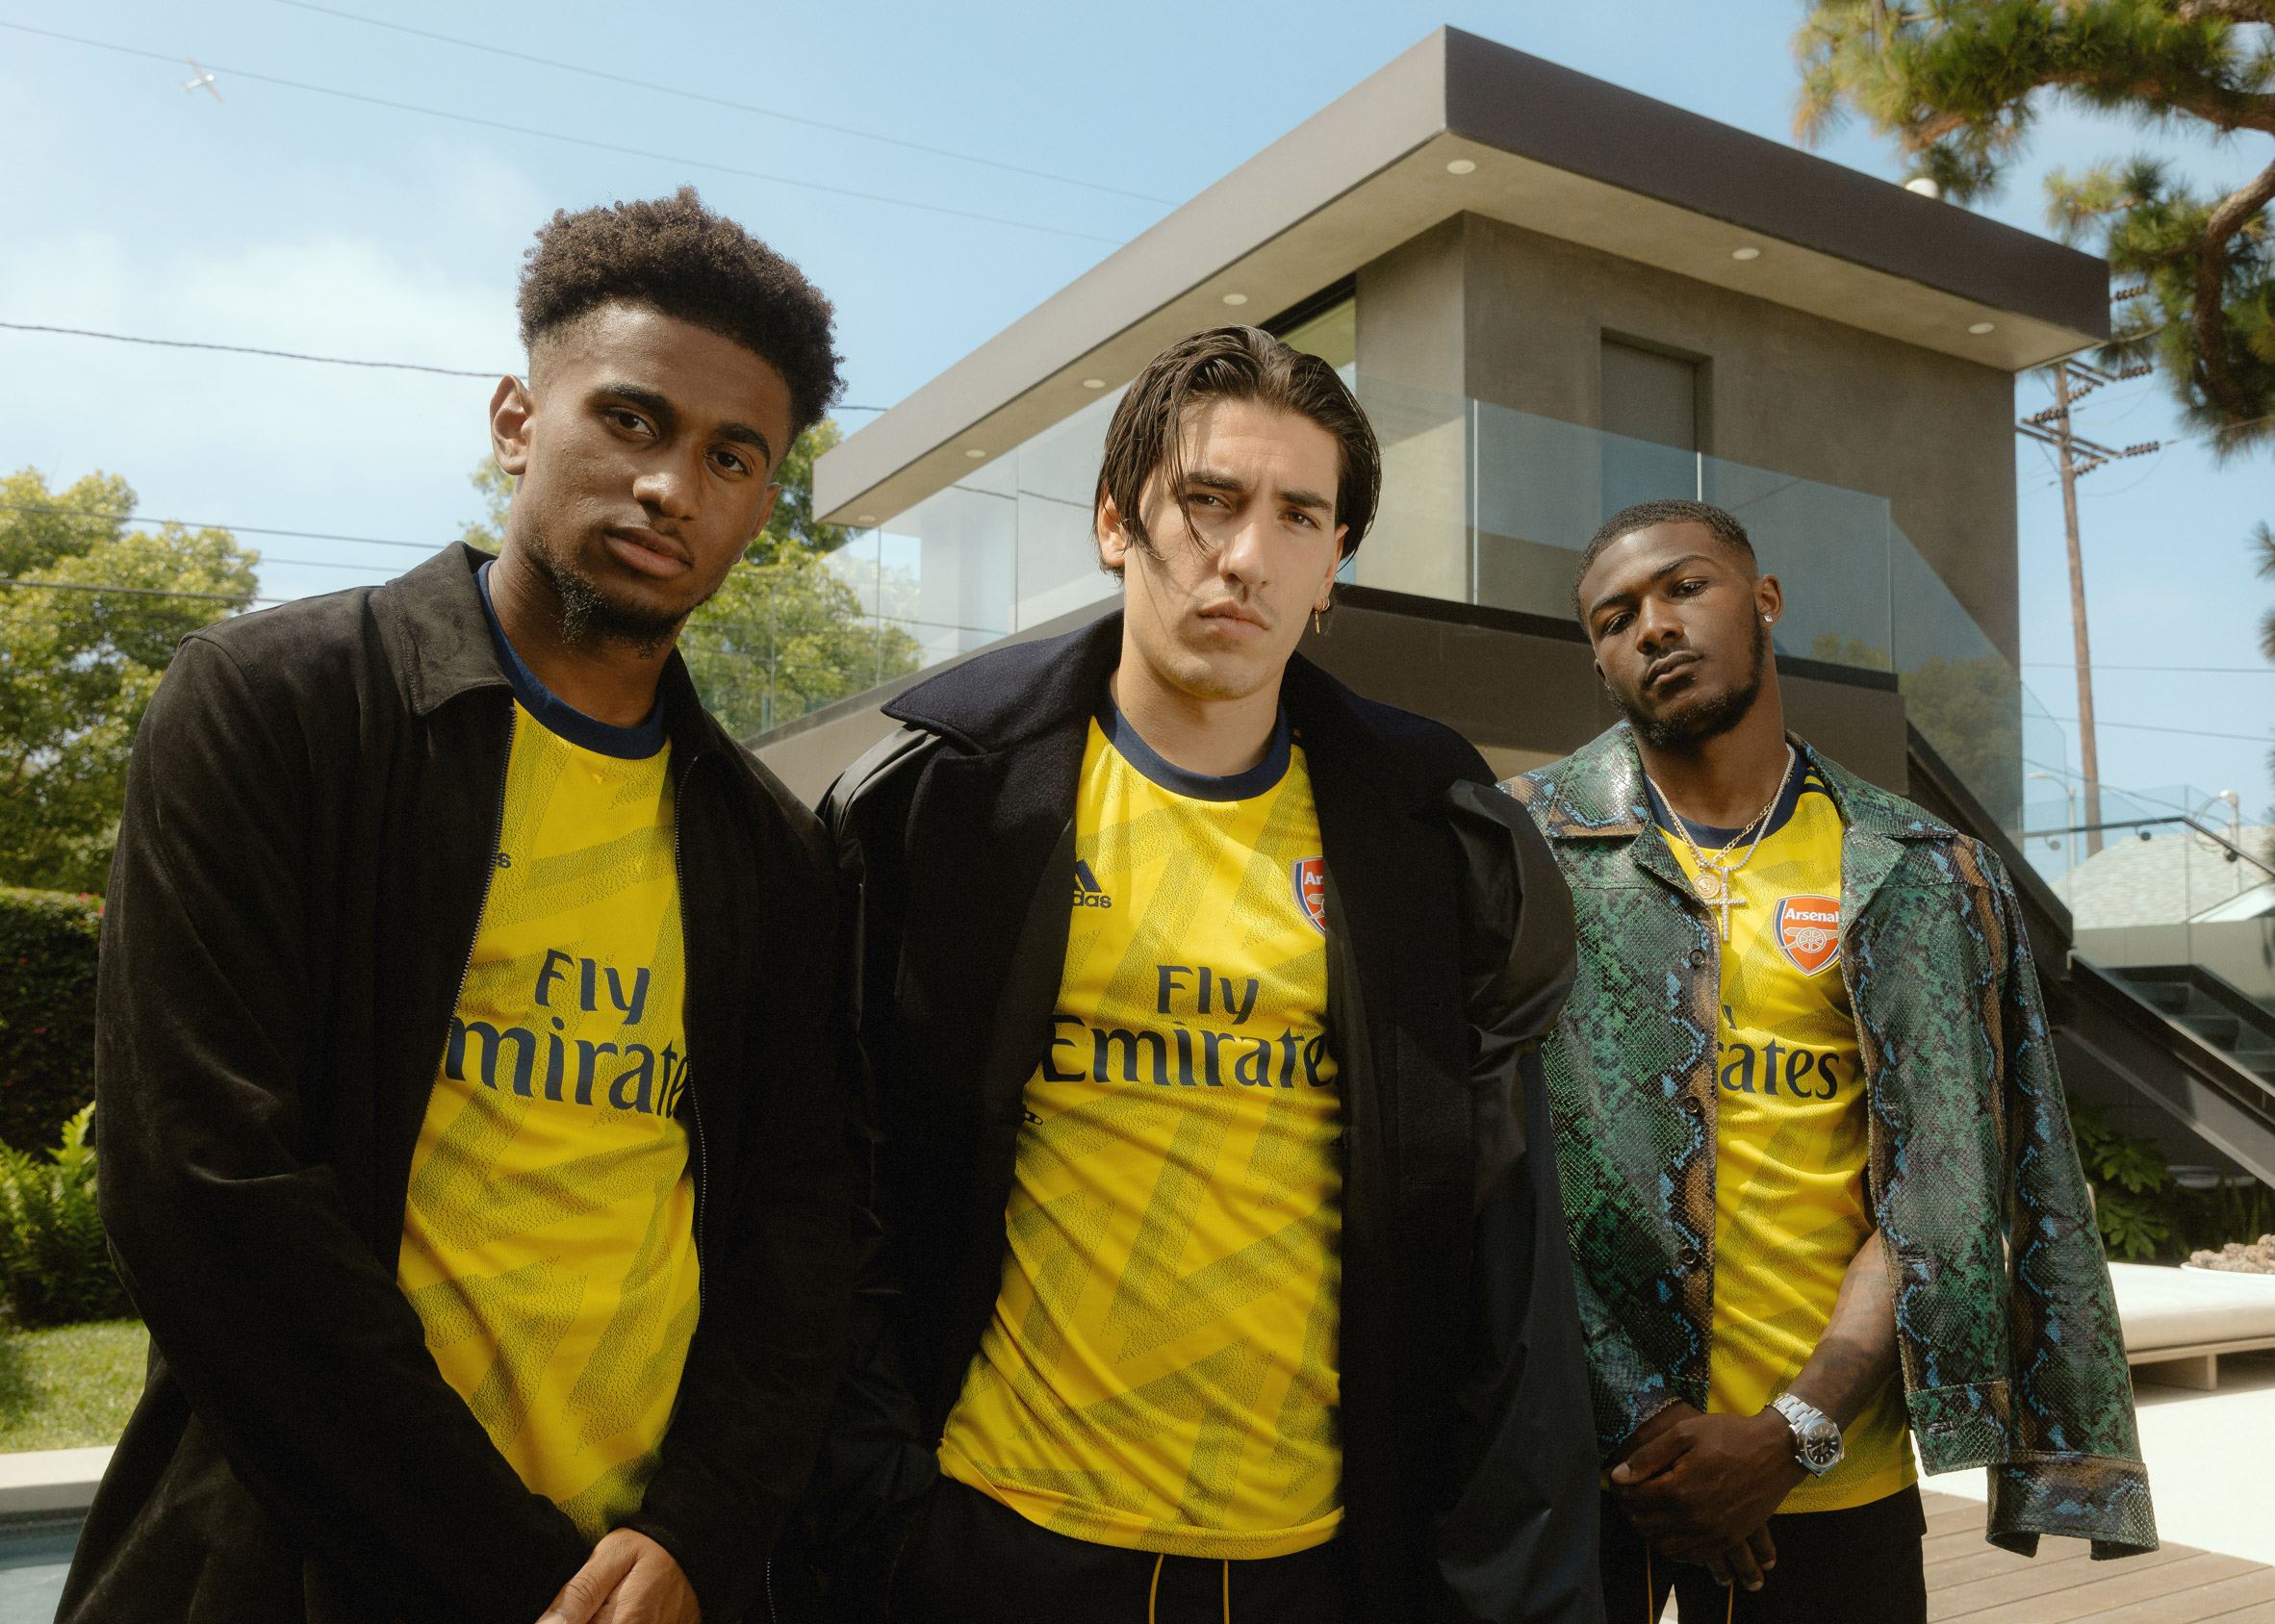 Modern Arsenal players in the 'bruised banana' Adidas kit will